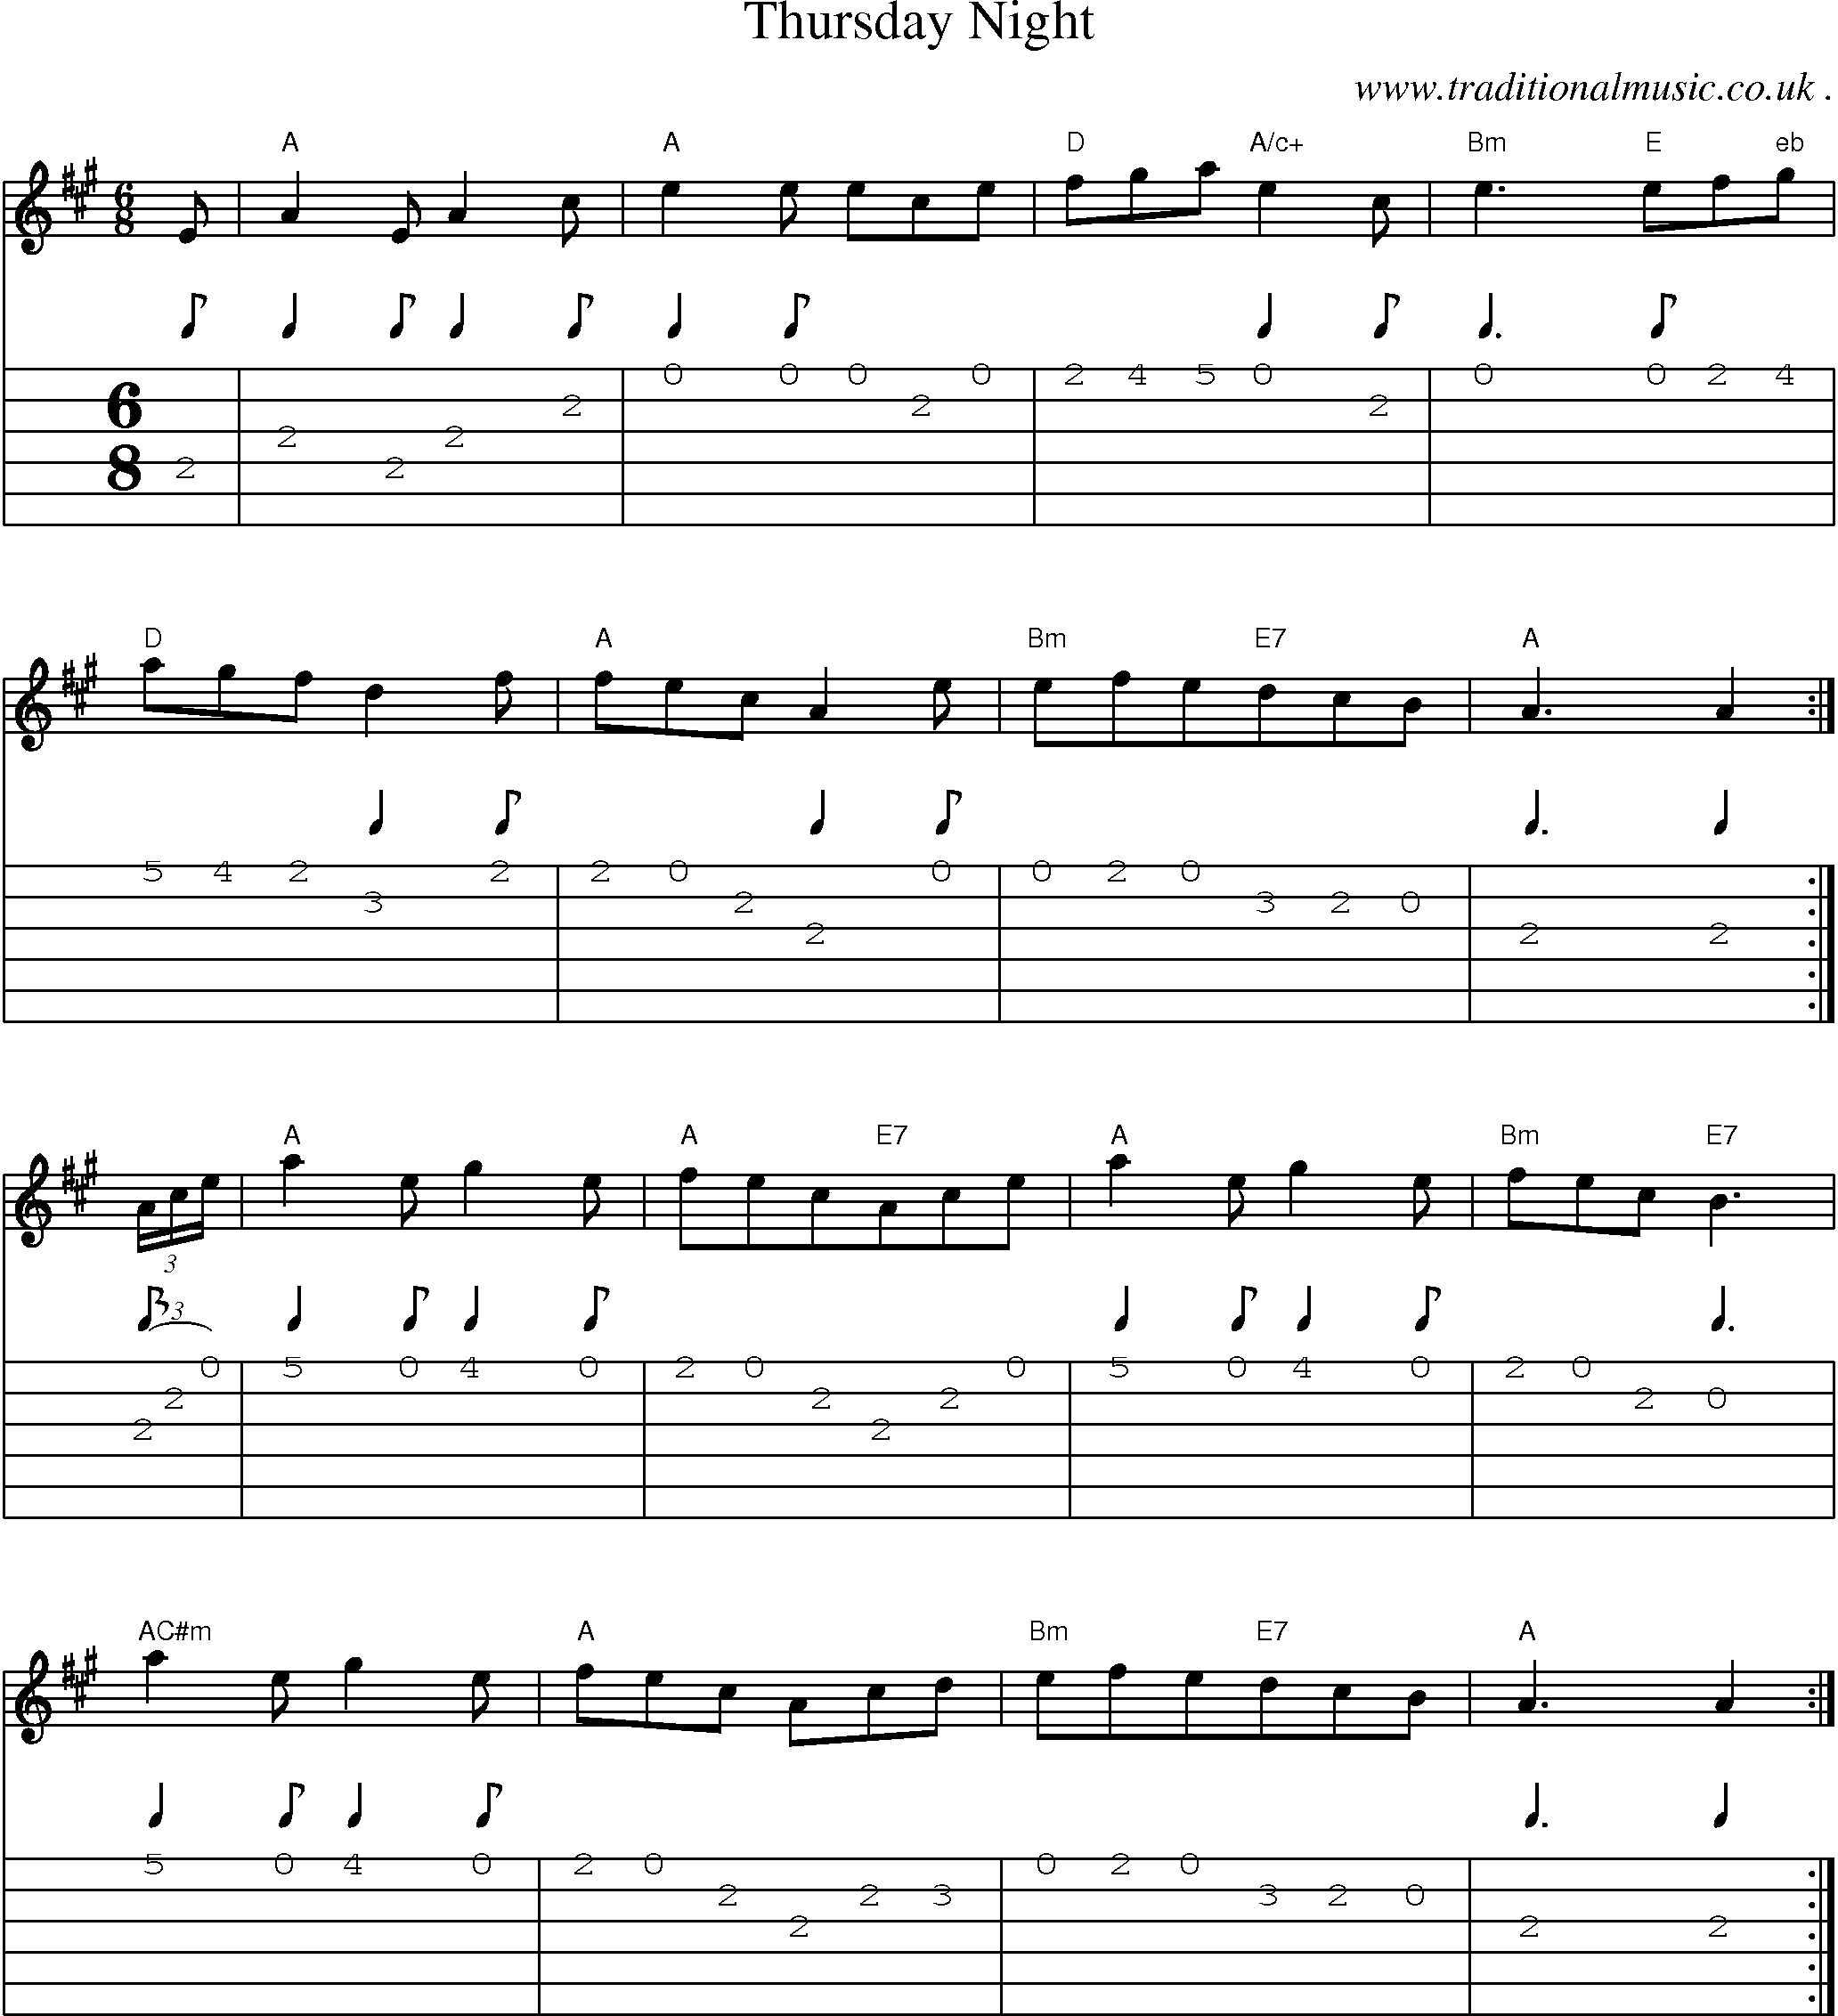 Sheet-Music and Guitar Tabs for Thursday Night